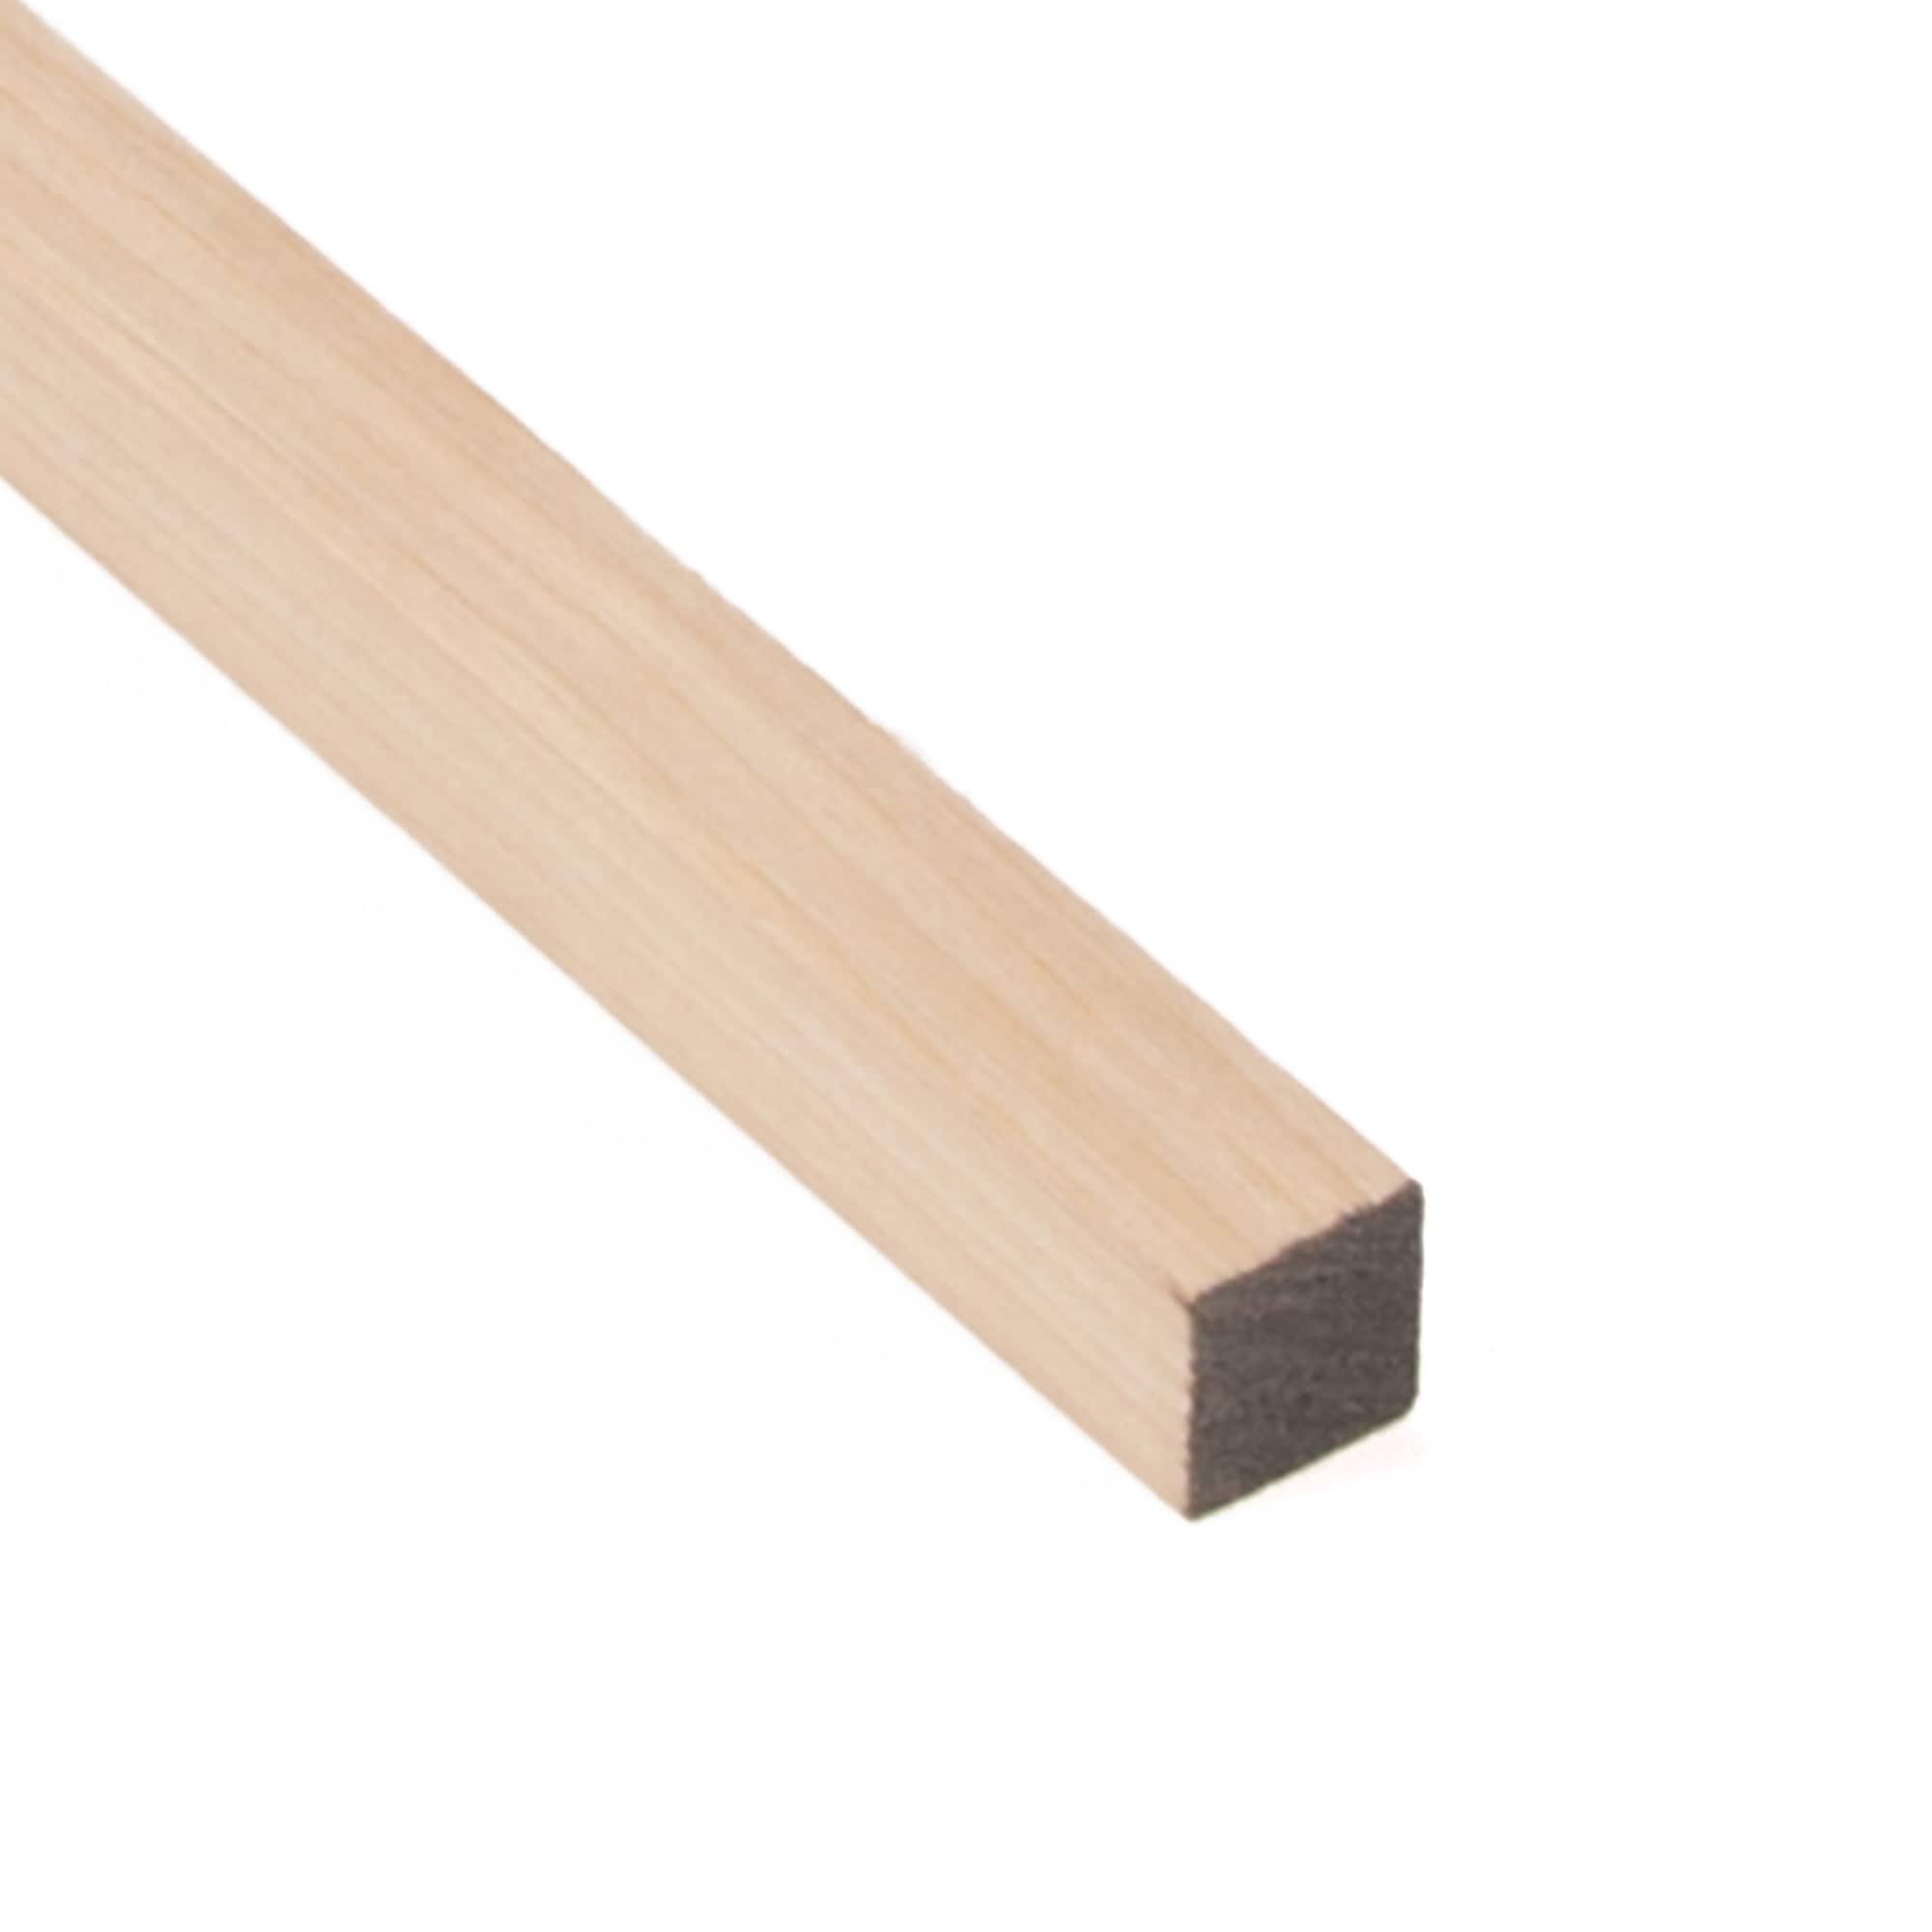 Waddell Oak Round Dowel - 36 in. x 0.75 in. - Sanded and Ready for